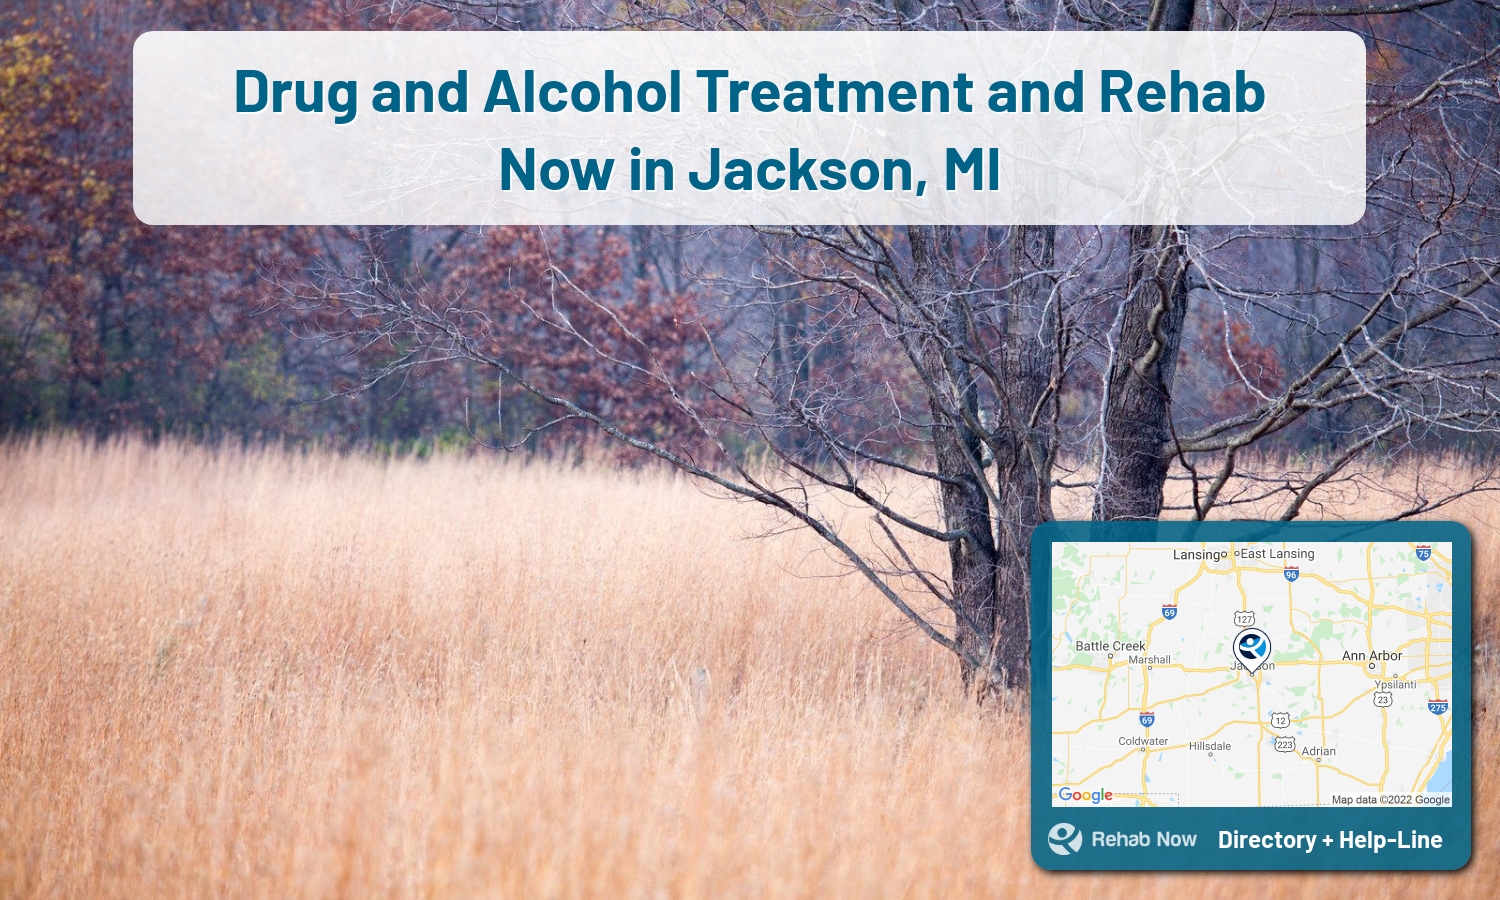 Jackson, MI Treatment Centers. Find drug rehab in Jackson, Michigan, or detox and treatment programs. Get the right help now!